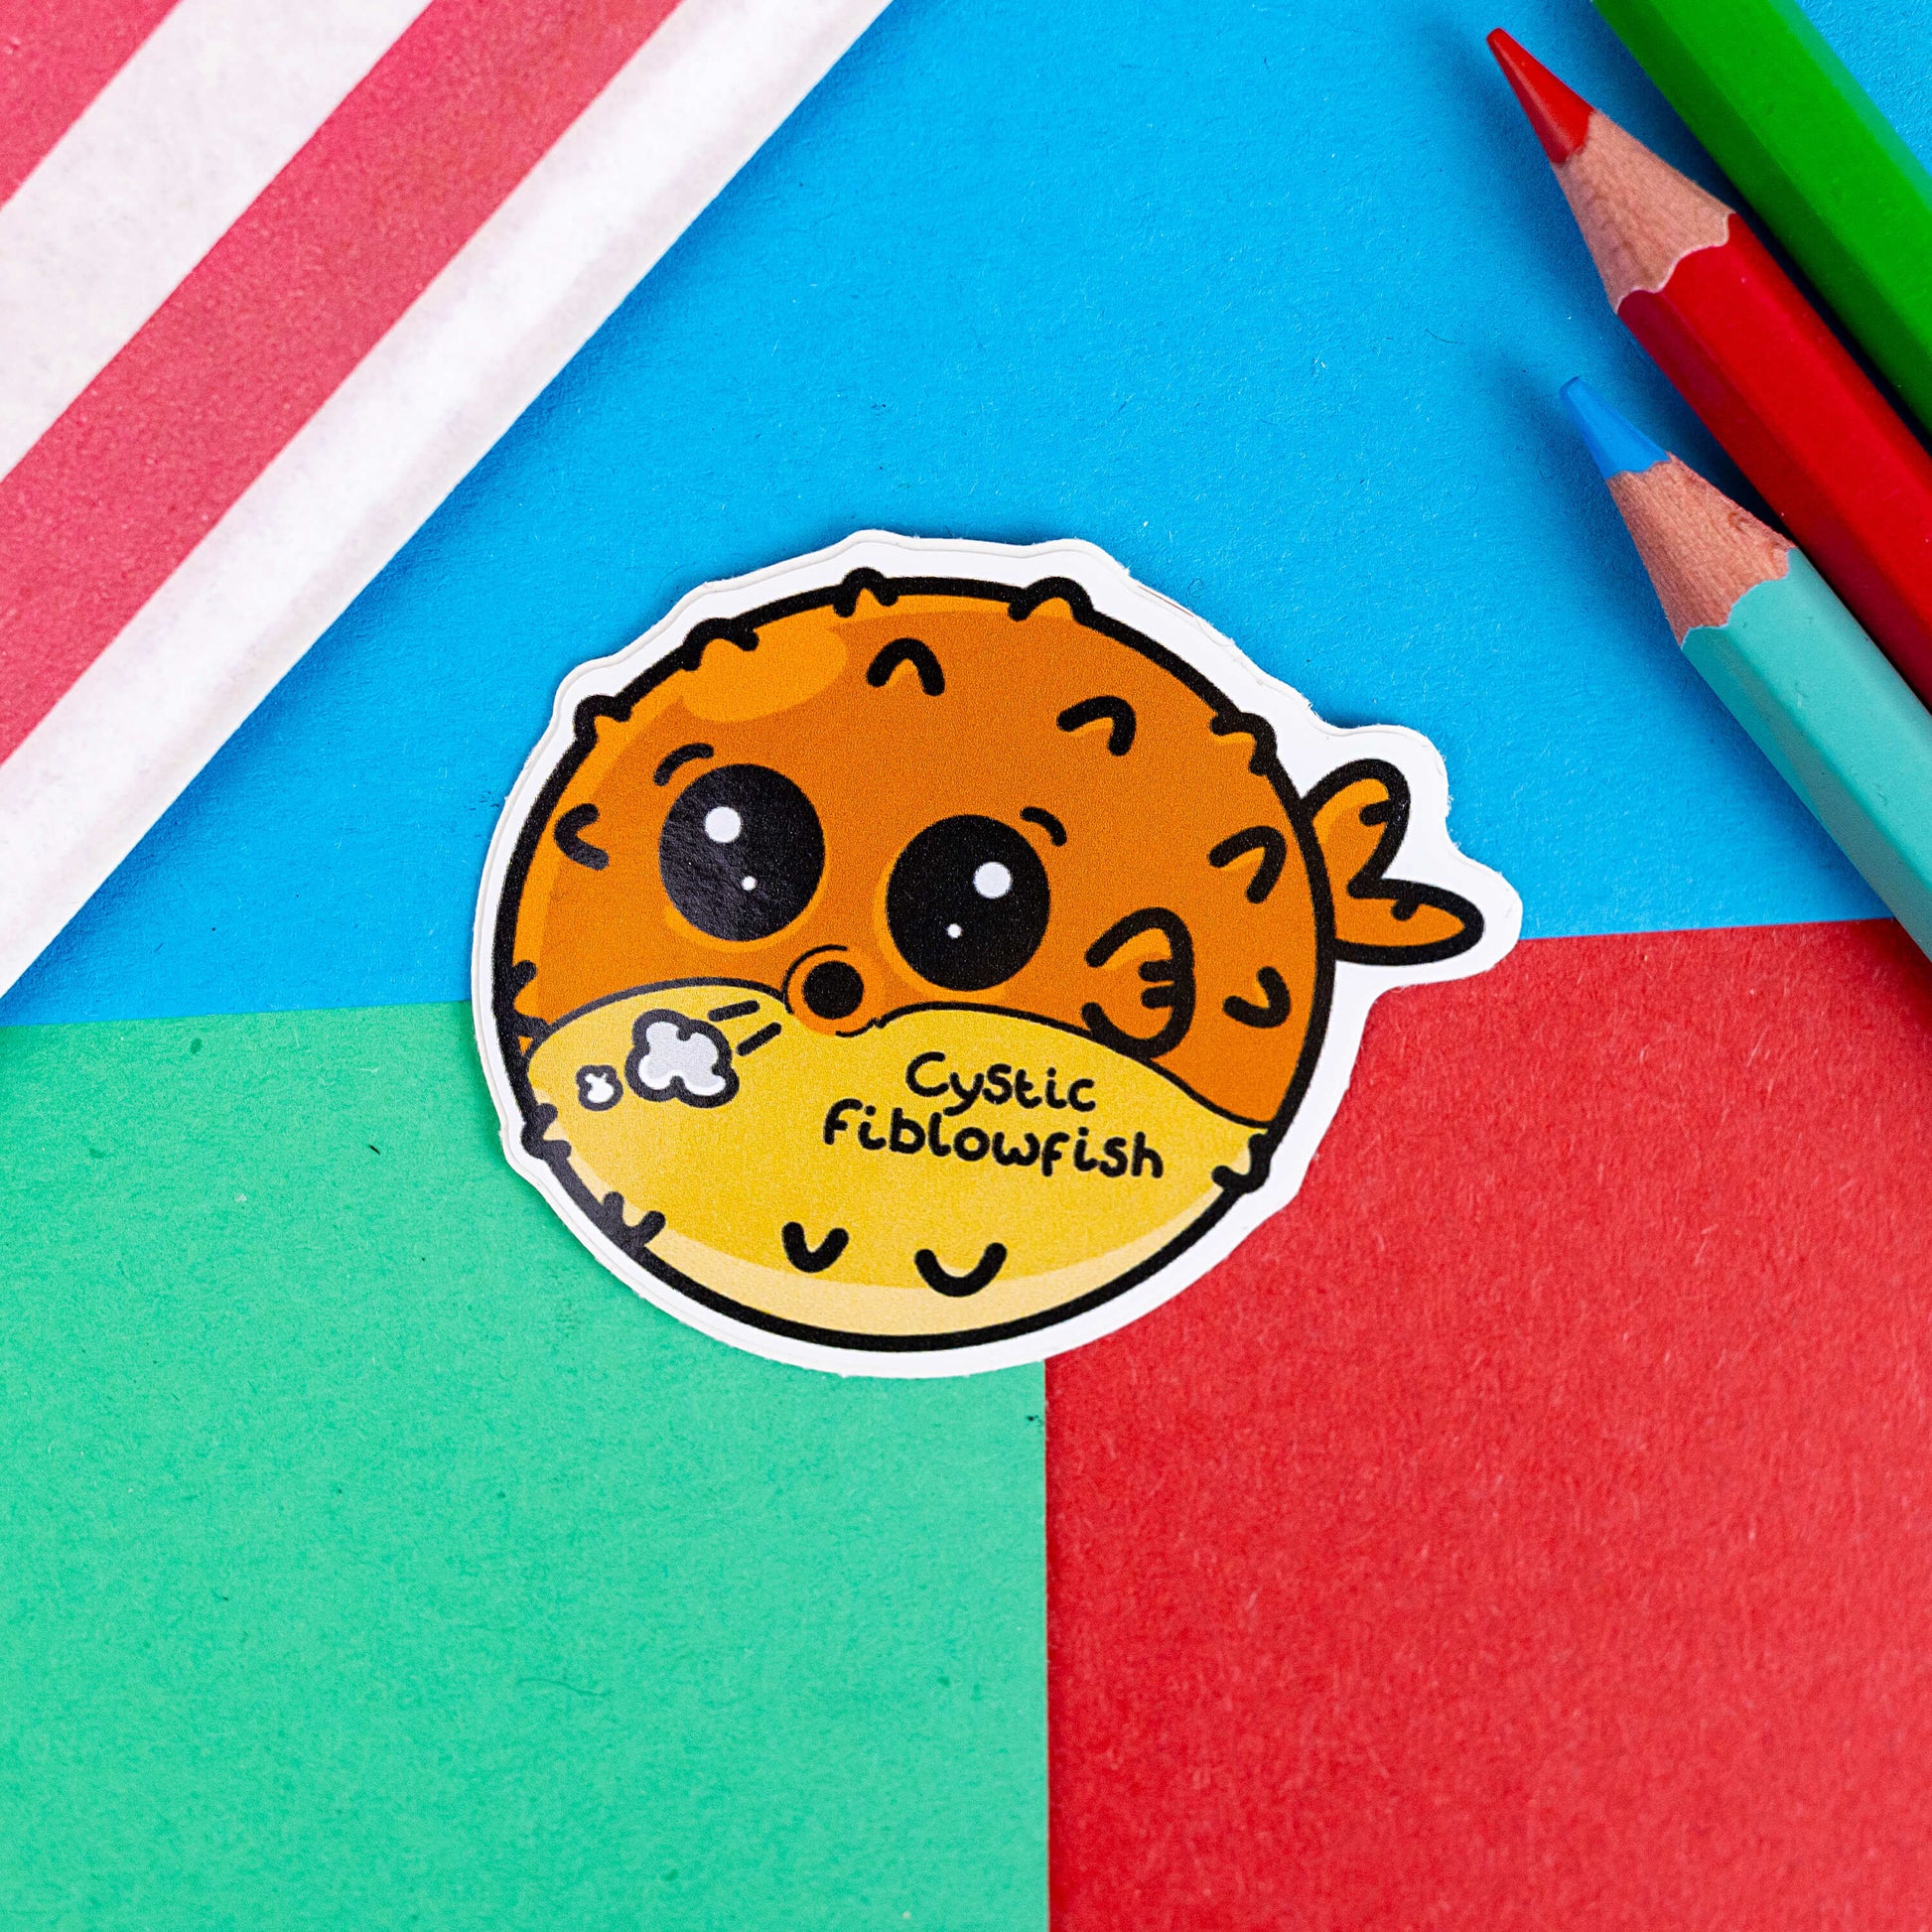 The Cystic Fiblowfish Sticker - Cystic Fibrosis on a red, blue and green background with colouring pencils and red stripe candy bag. The pufferfish shape sticker is wheezing with clouds coming out its mouth and black text across its belly reading 'cystic fiblowfish'. The design is raising awareness for cystic fibrosis.